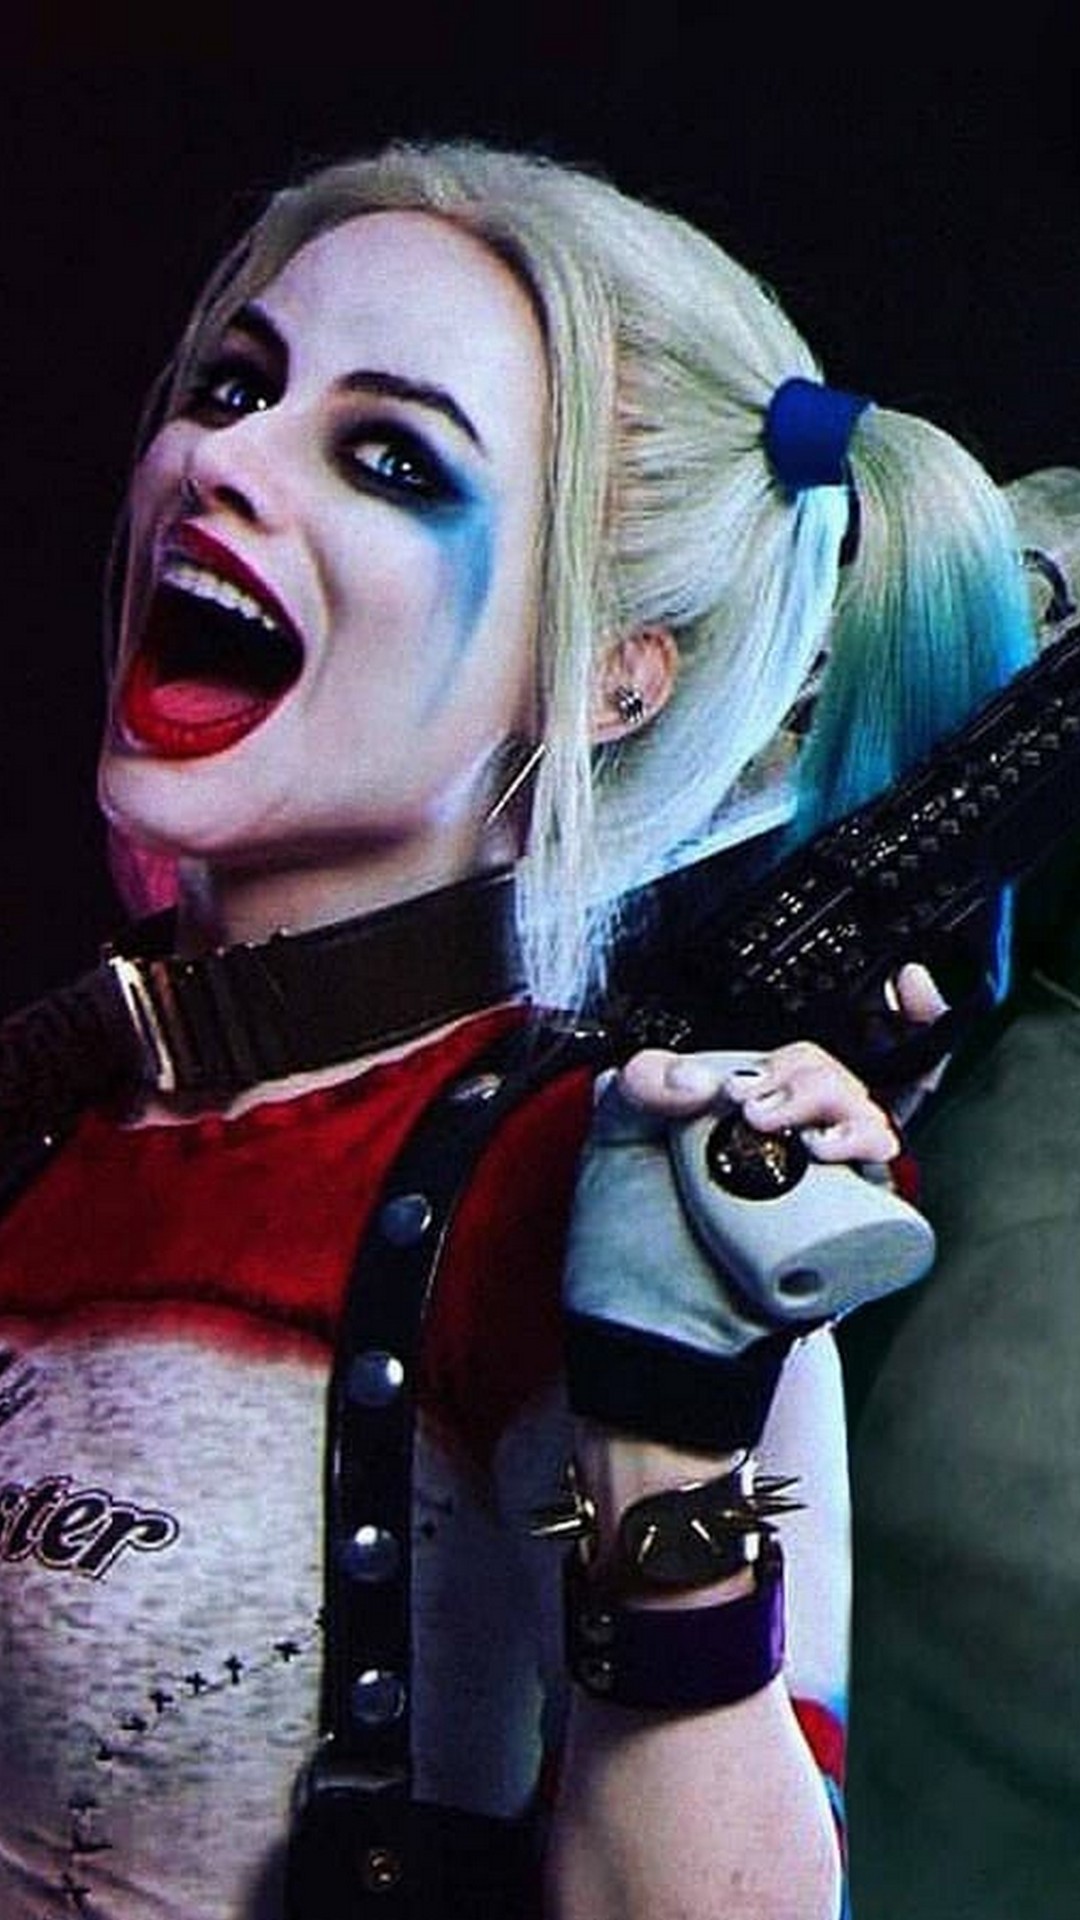 Harley Quinn Pictures iPhone 6 Wallpaper with image resolution 1080x1920 pixel. You can use this wallpaper as background for your desktop Computer Screensavers, Android or iPhone smartphones